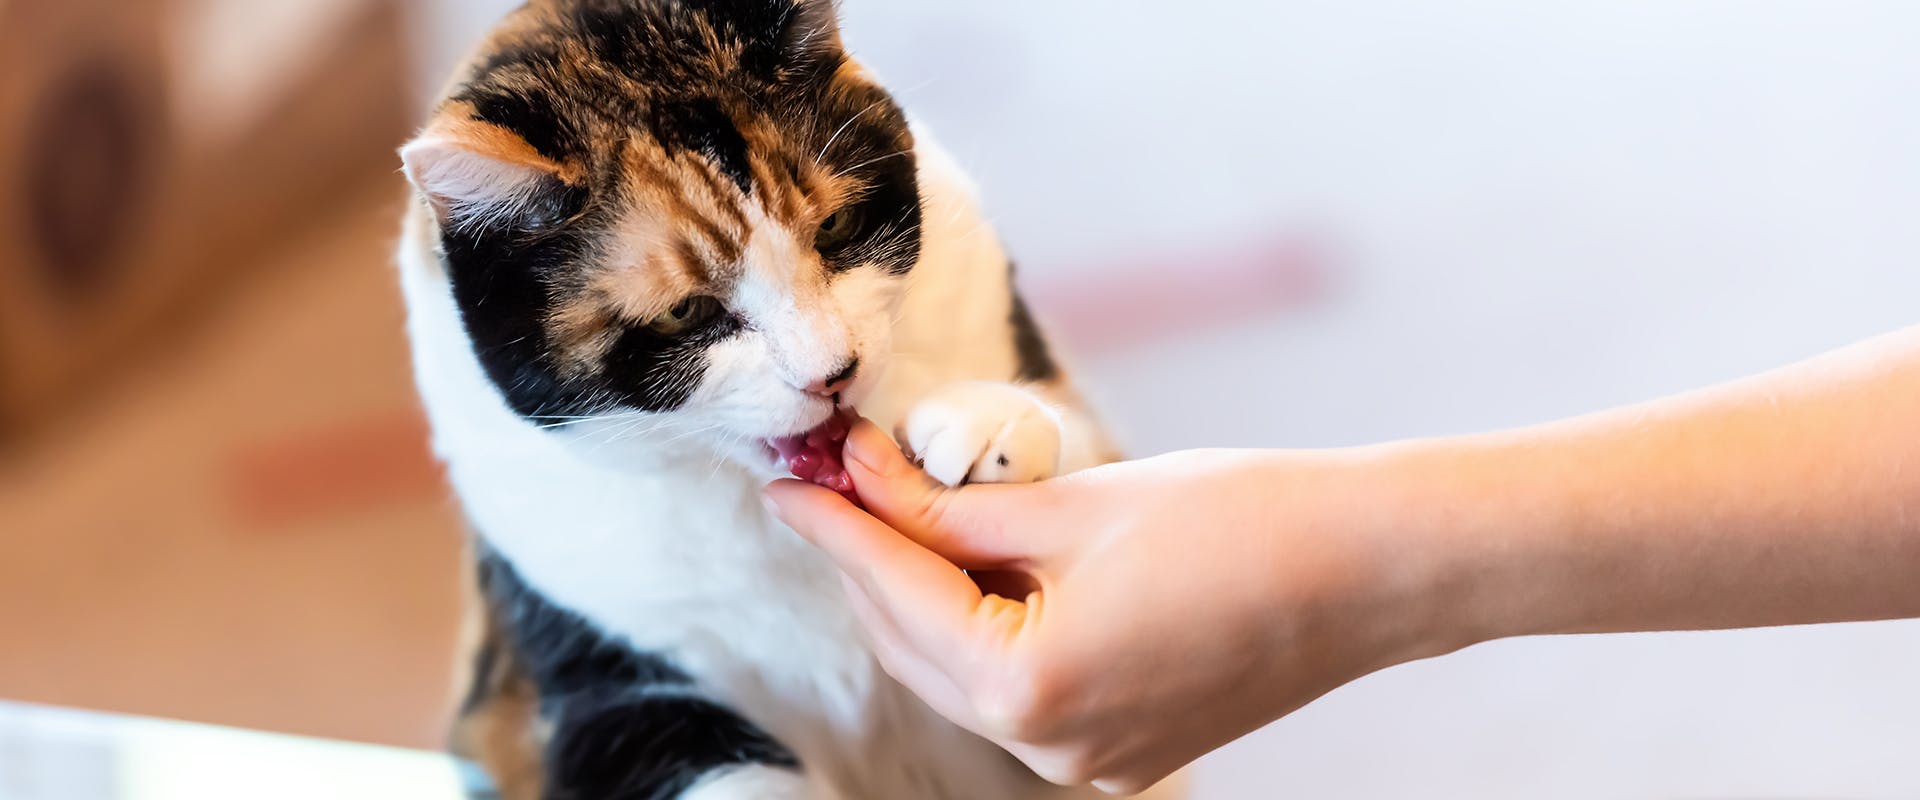 A cat receiving a treat from its owner's hand